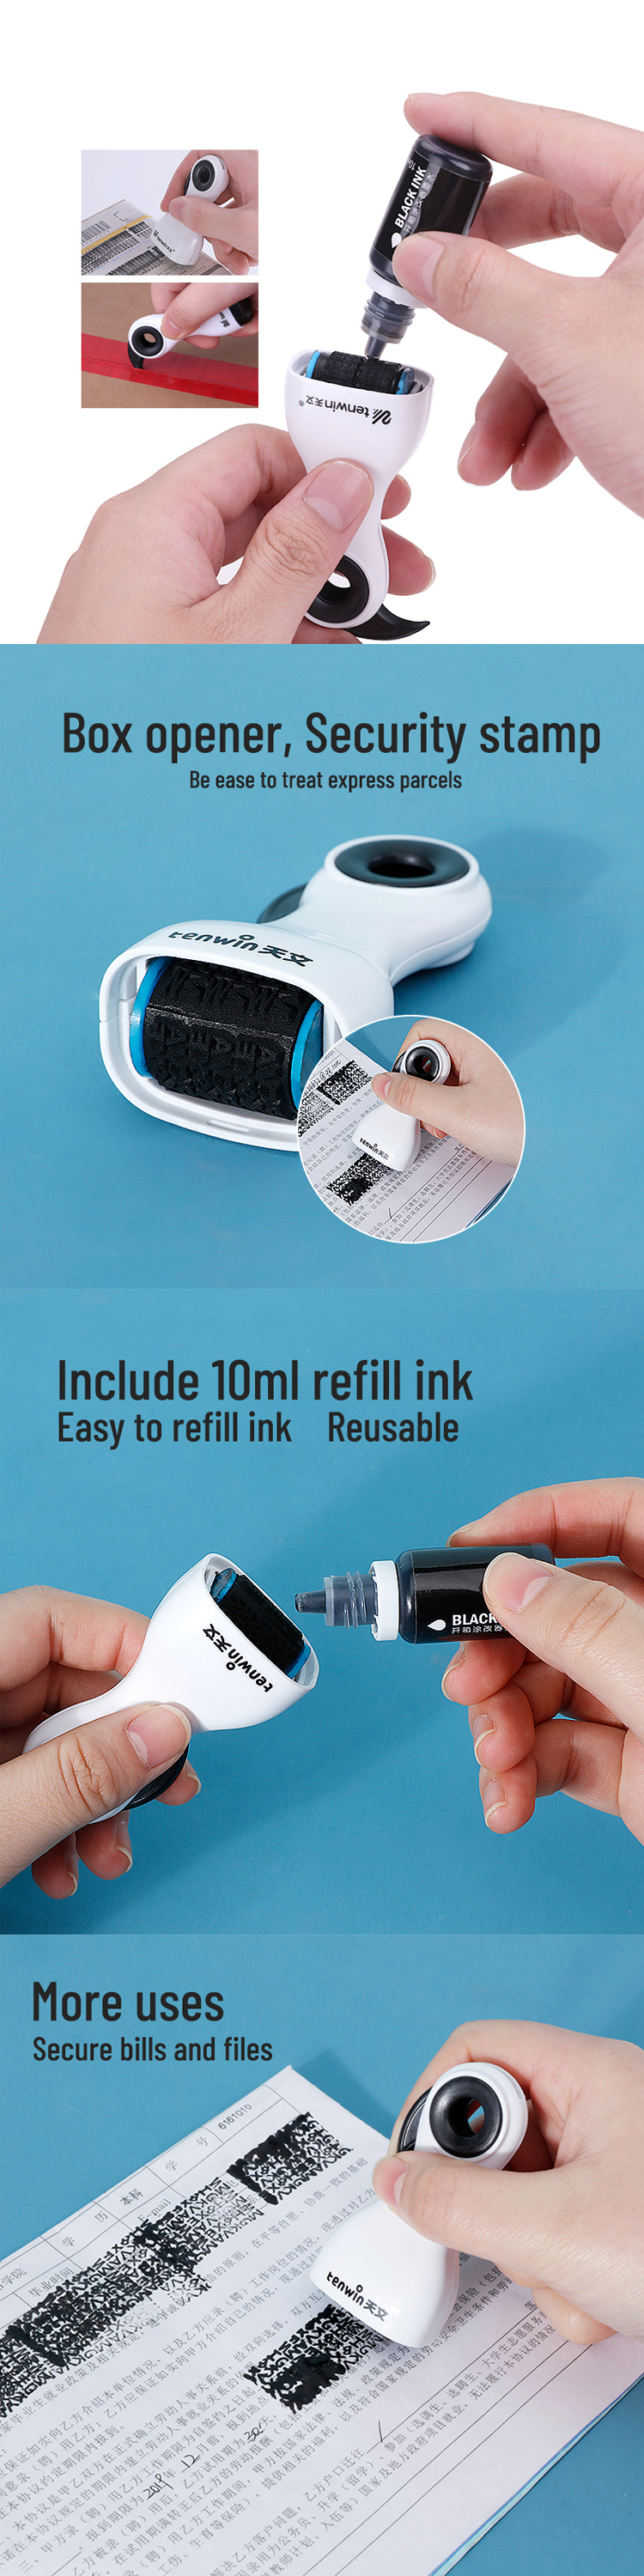 Tenwin 7605 Identity Theft Prevention Confidential Security Secure Stamp Roller Self-Inking